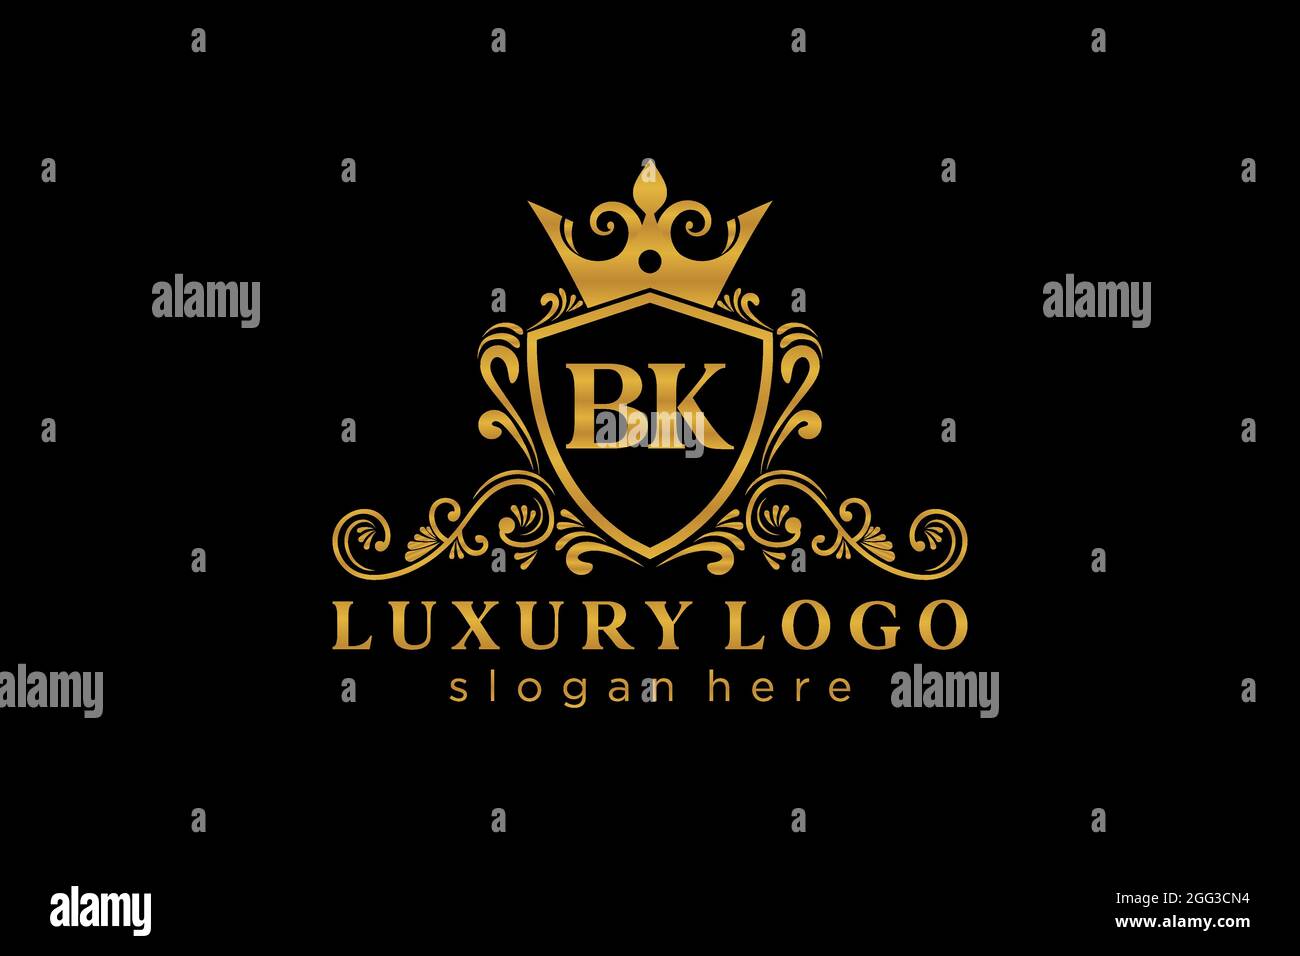 BK Letter Royal Luxury Logo template in vector art for Restaurant, Royalty, Boutique, Cafe, Hotel, Heraldic, Jewelry, Fashion and other vector illustr Stock Vector